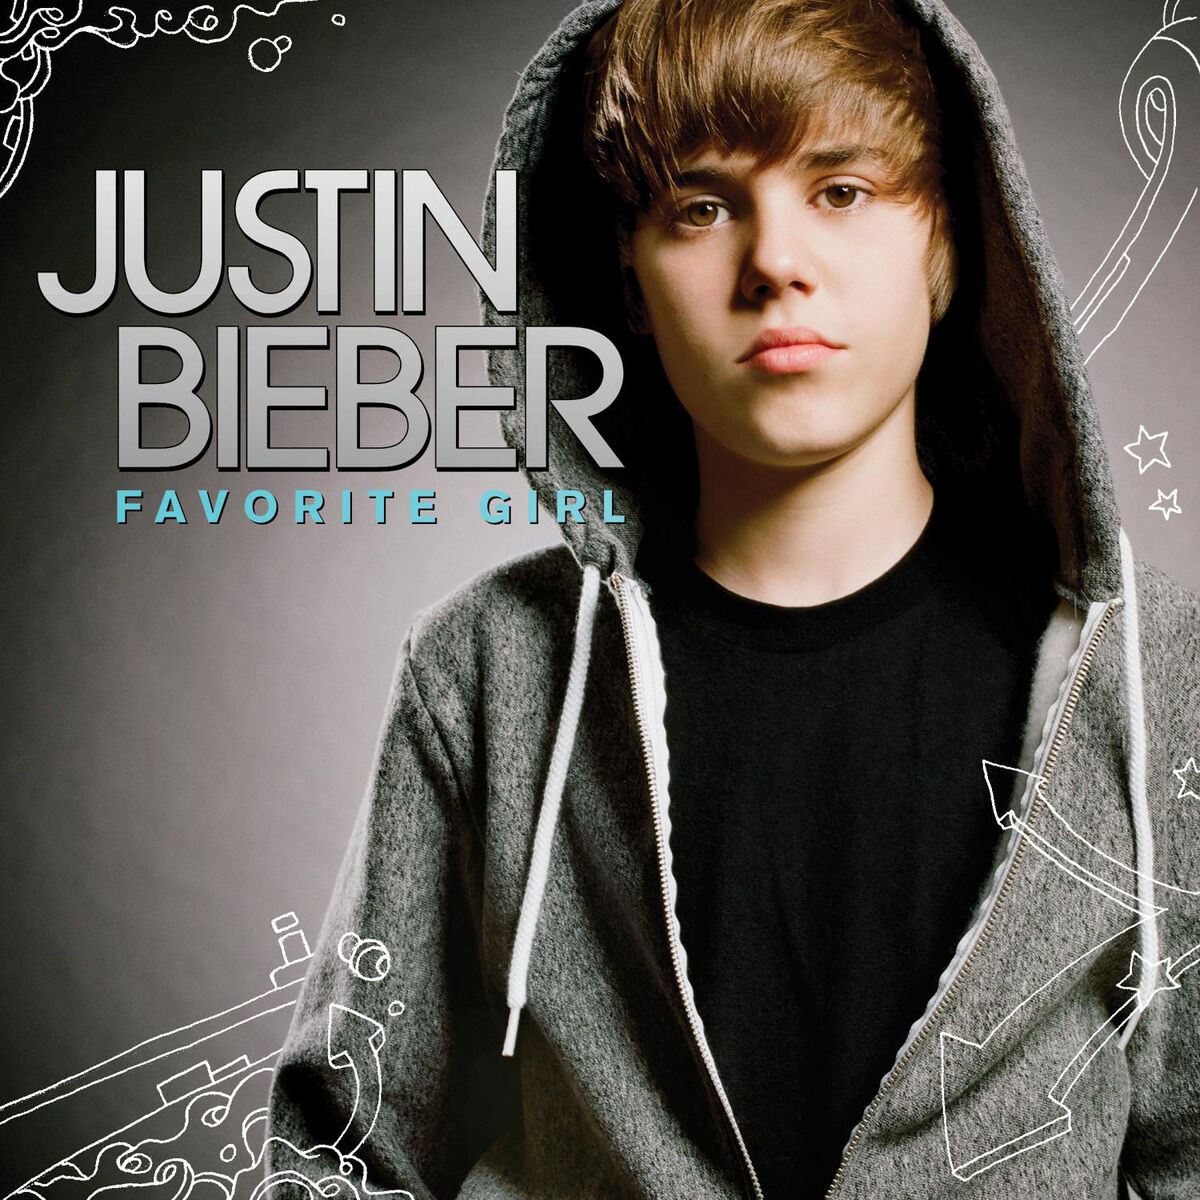 One Time (Justin Bieber song) - Wikipedia